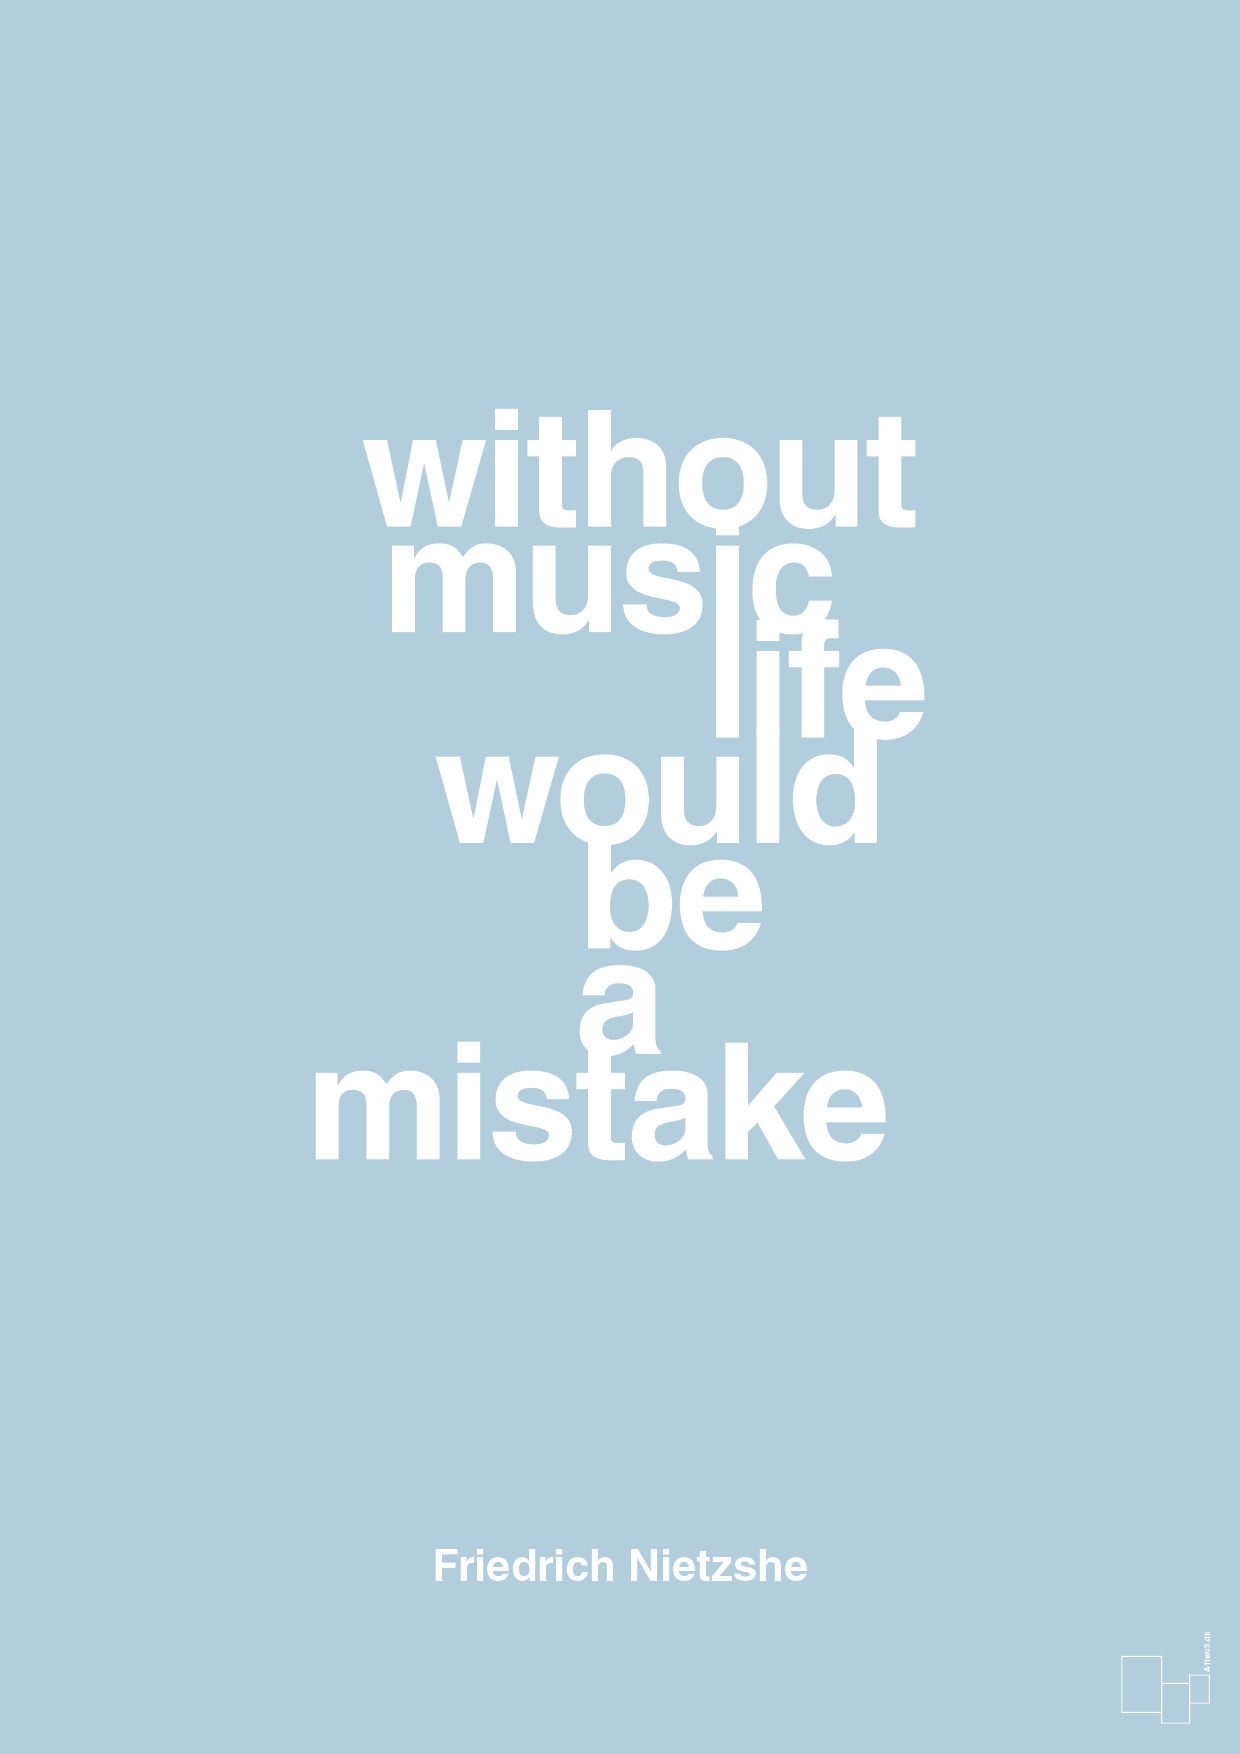 without music life would be a mistake - Plakat med Citater i Heavenly Blue